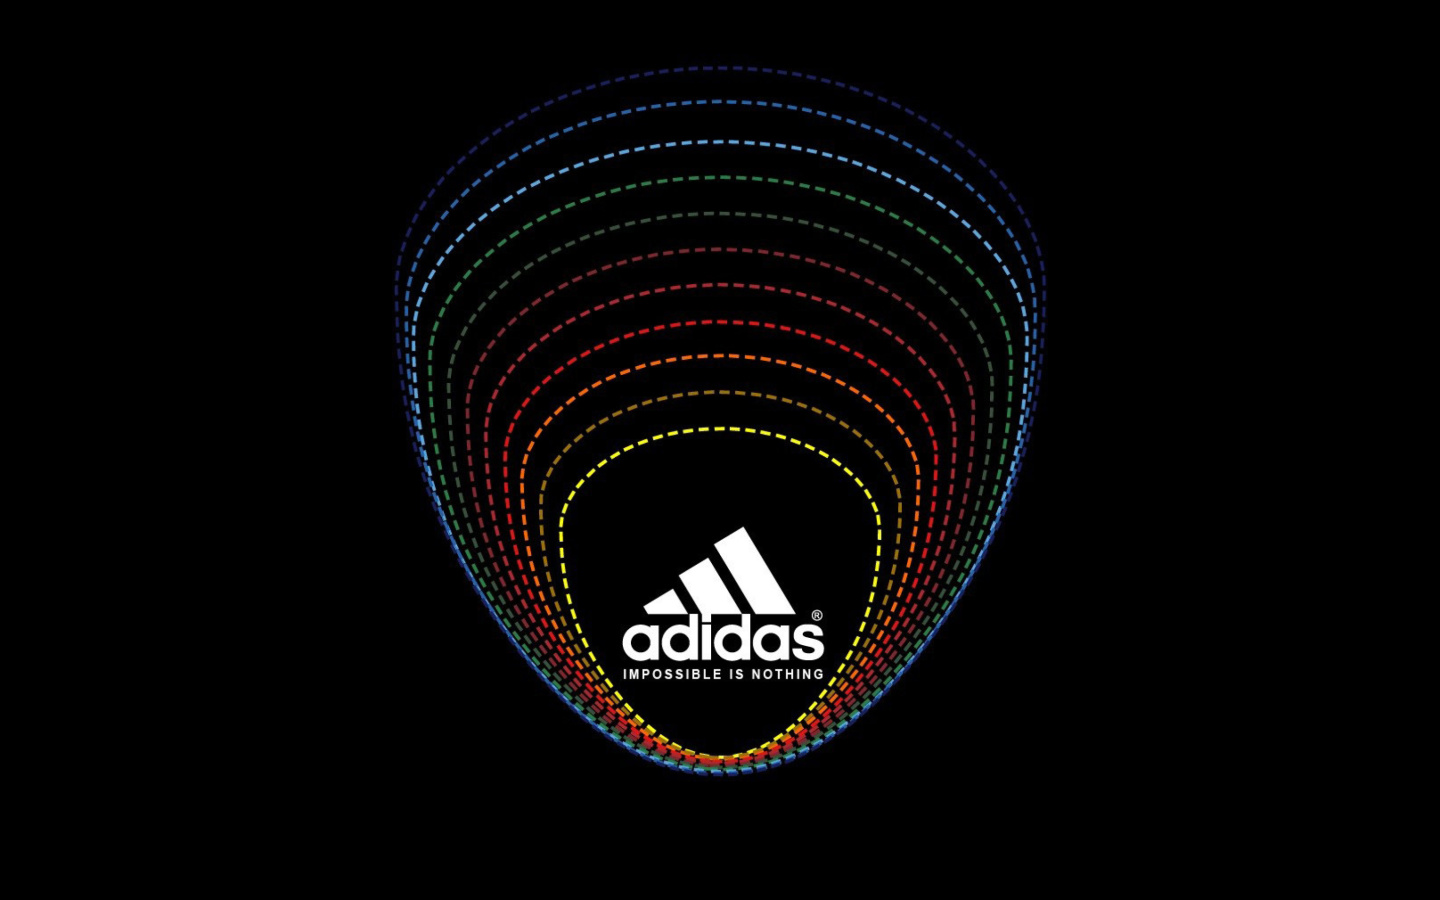 Adidas Tagline, Impossible is Nothing wallpaper 1440x900